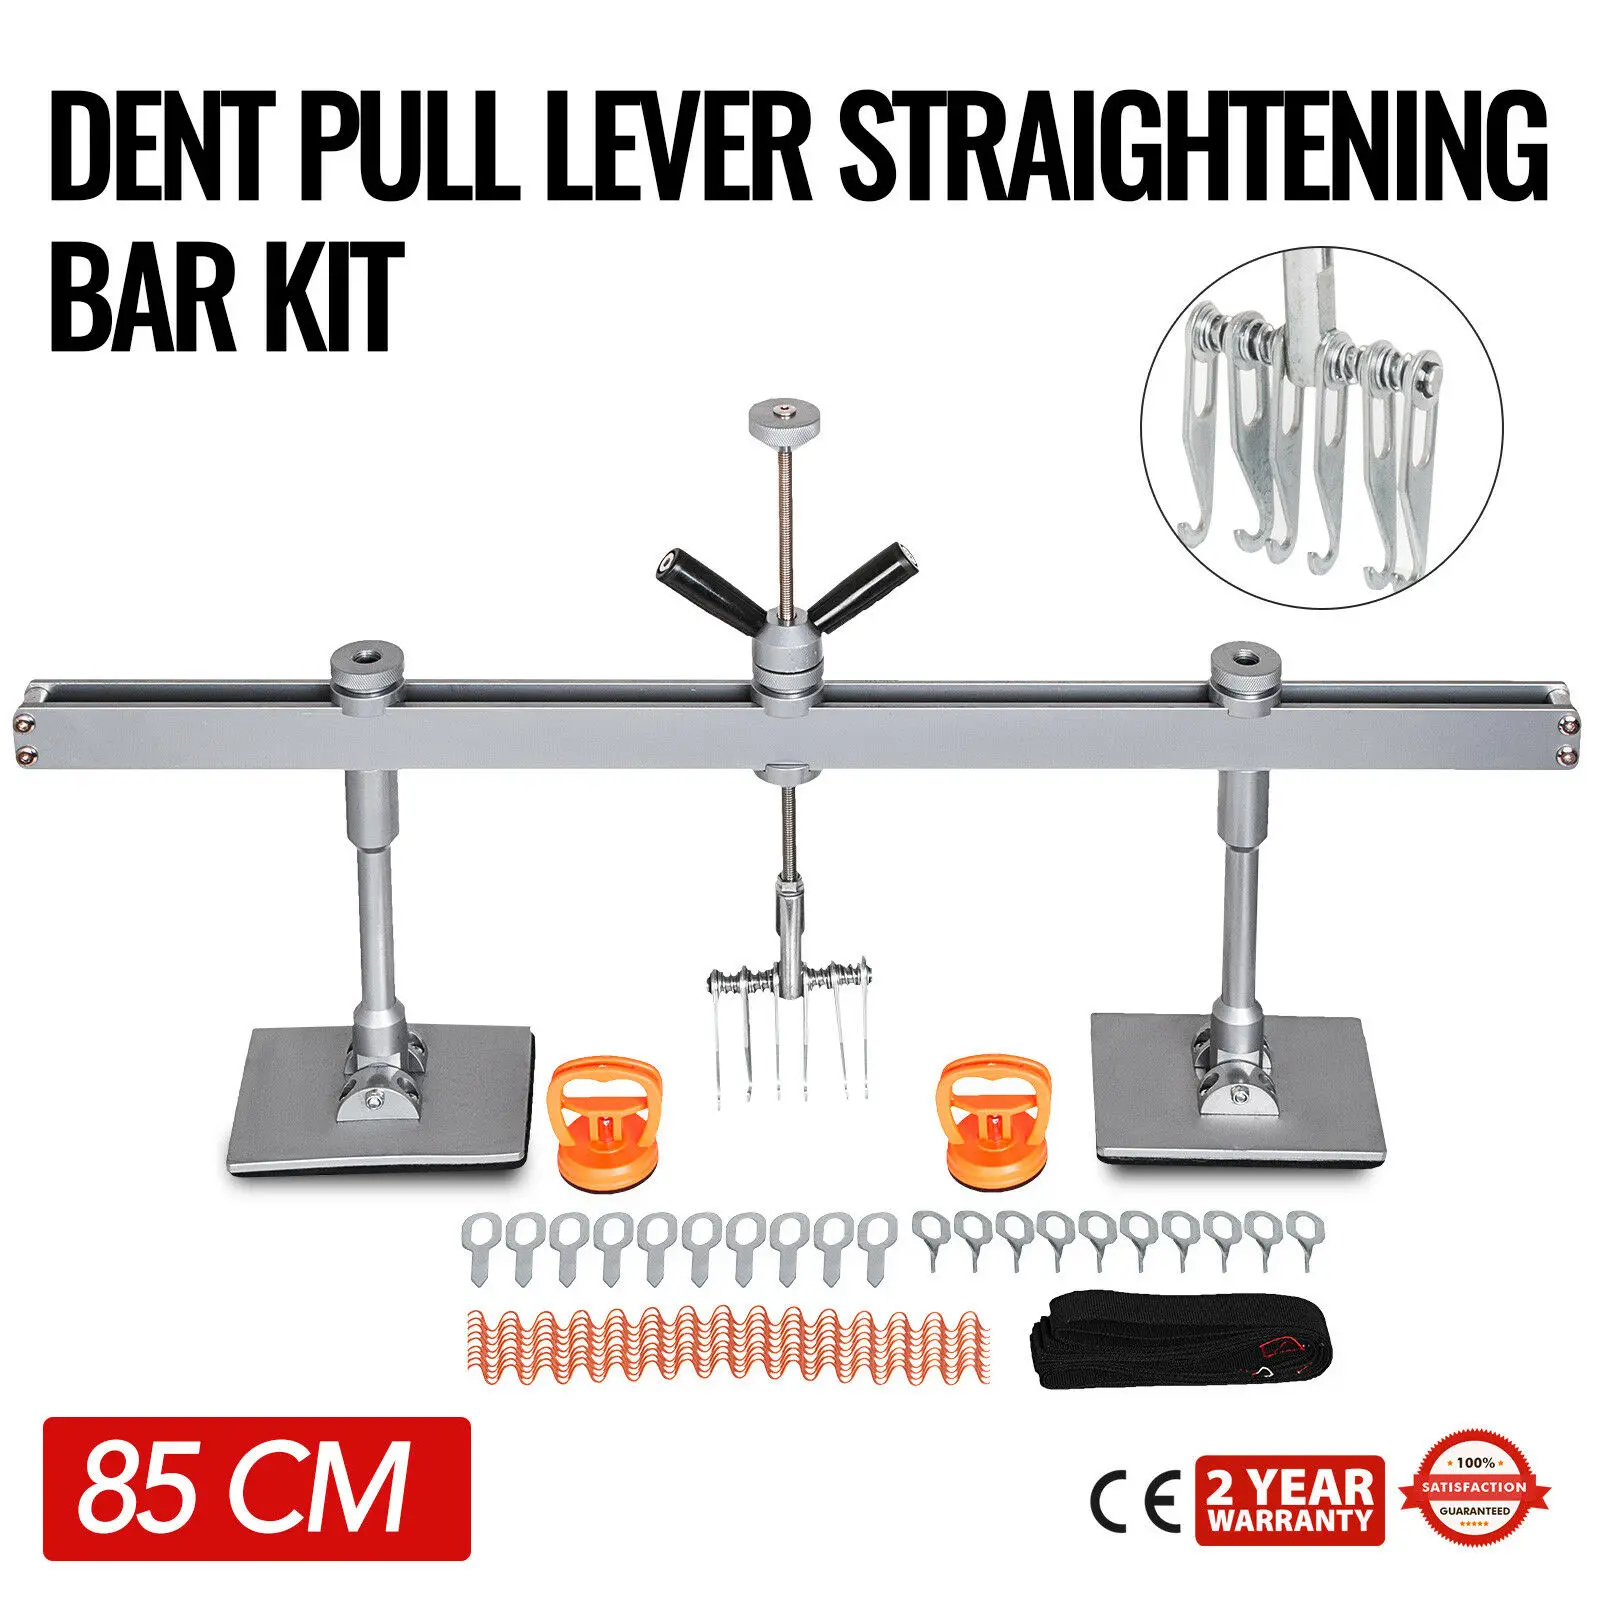 6 CLAW HOOK 85CM DENT PULL LEVER BAR KIT